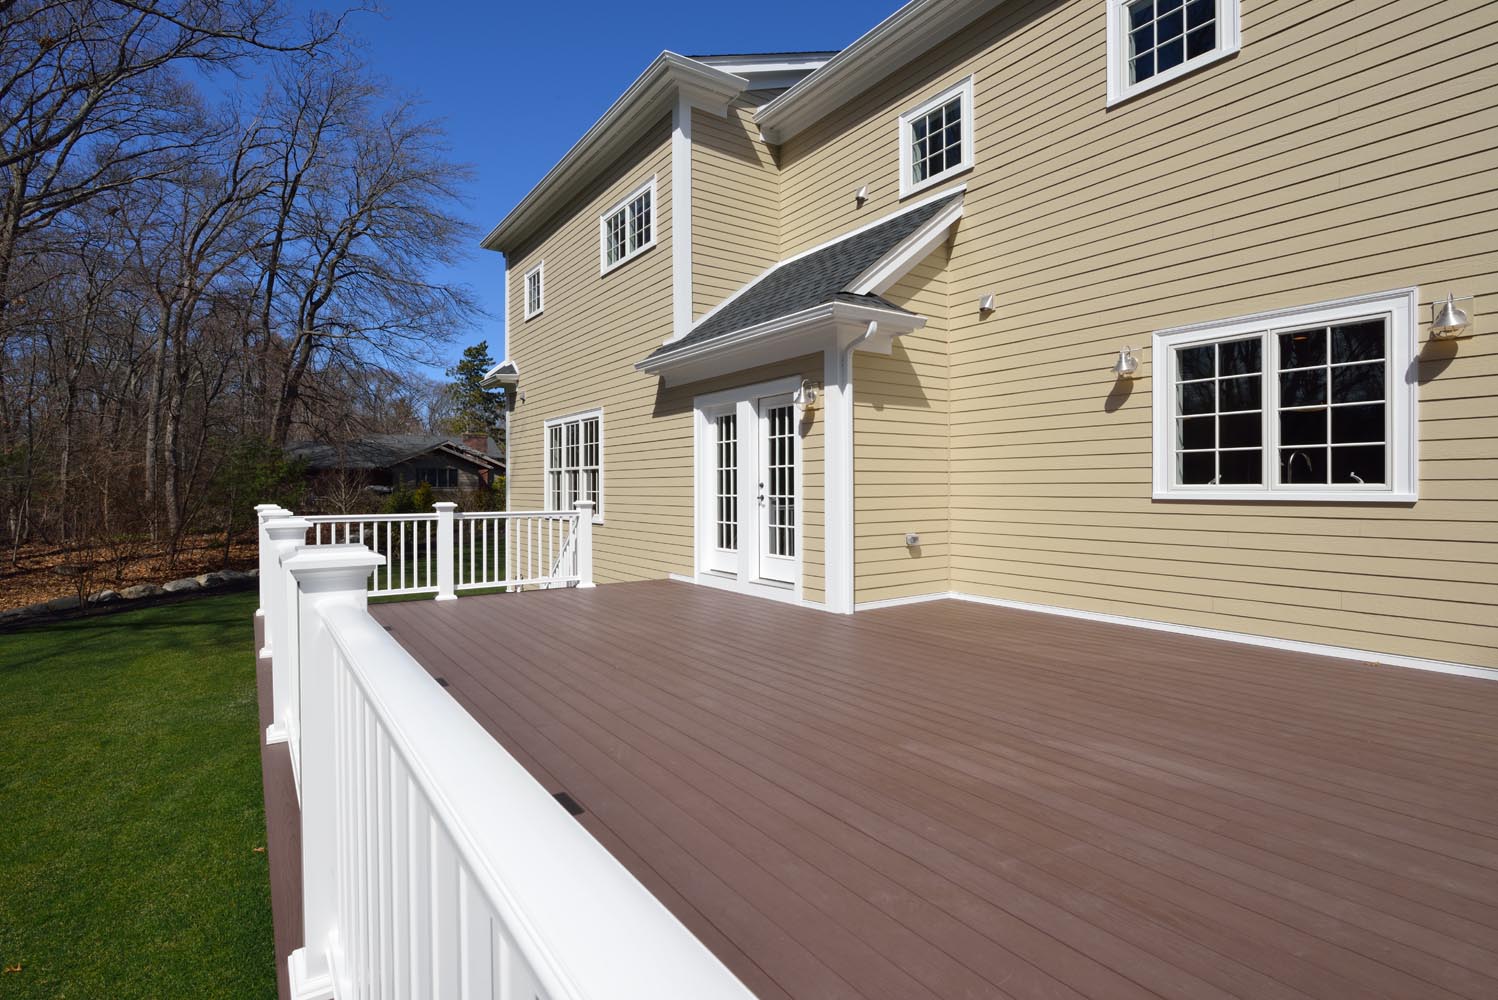 Large new deck in house backyard. Composite boards, white railing posts and veranda